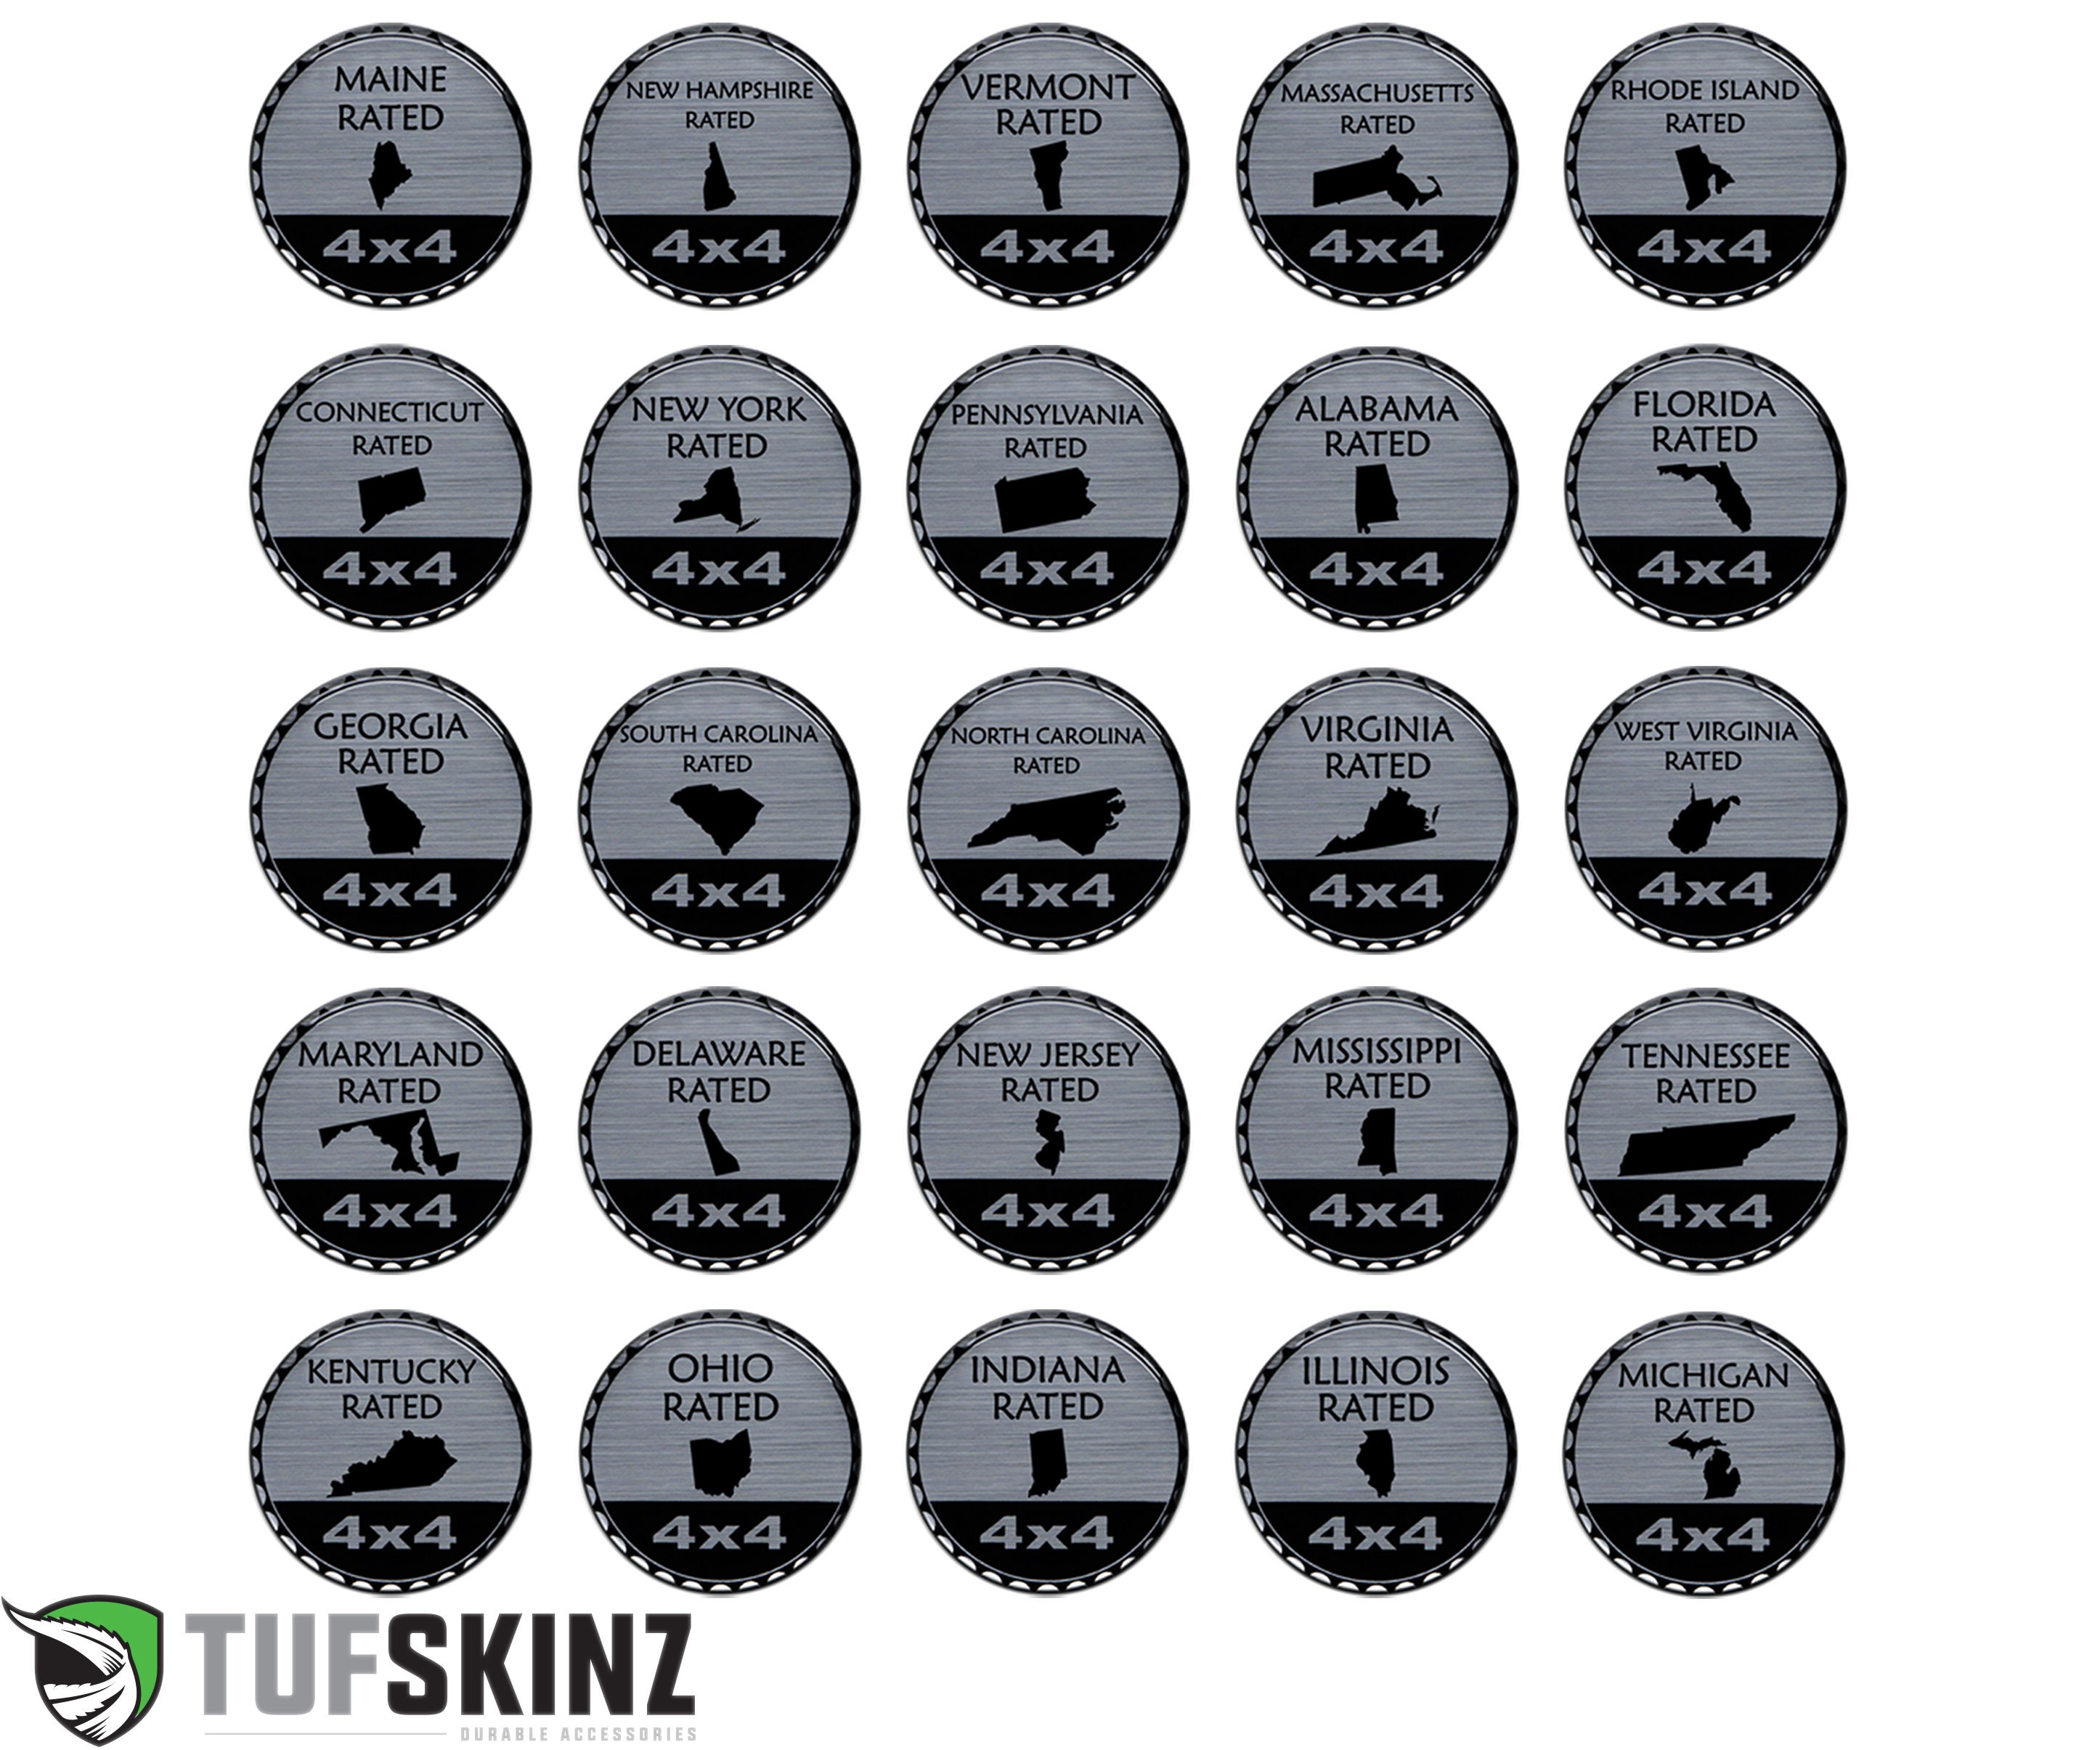 Tufskinz Professions Rated Badges Brushed Silver 1 Piece Kit -  Ireland